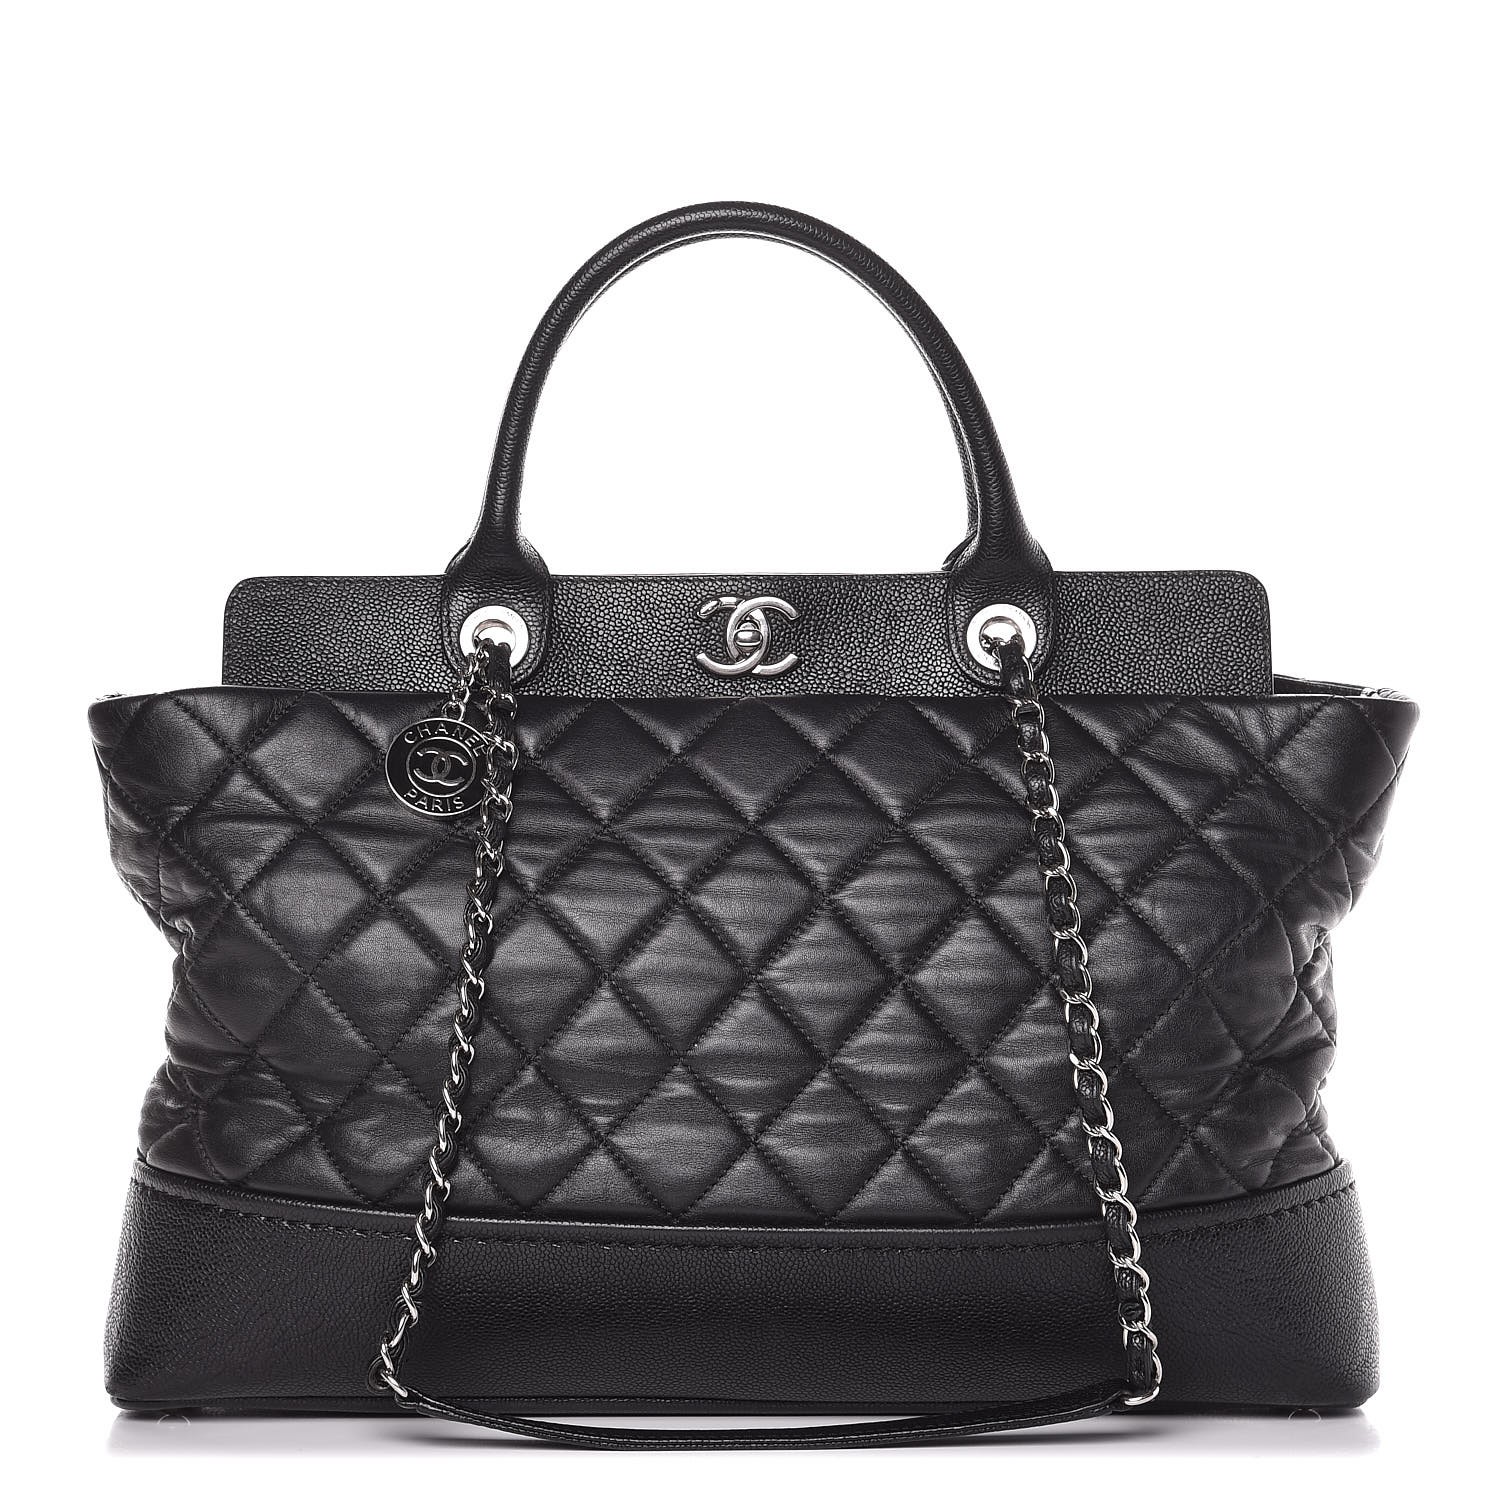 CHANEL Lambskin Caviar Quilted Bi Coco Large Shopper Tote Black 328824